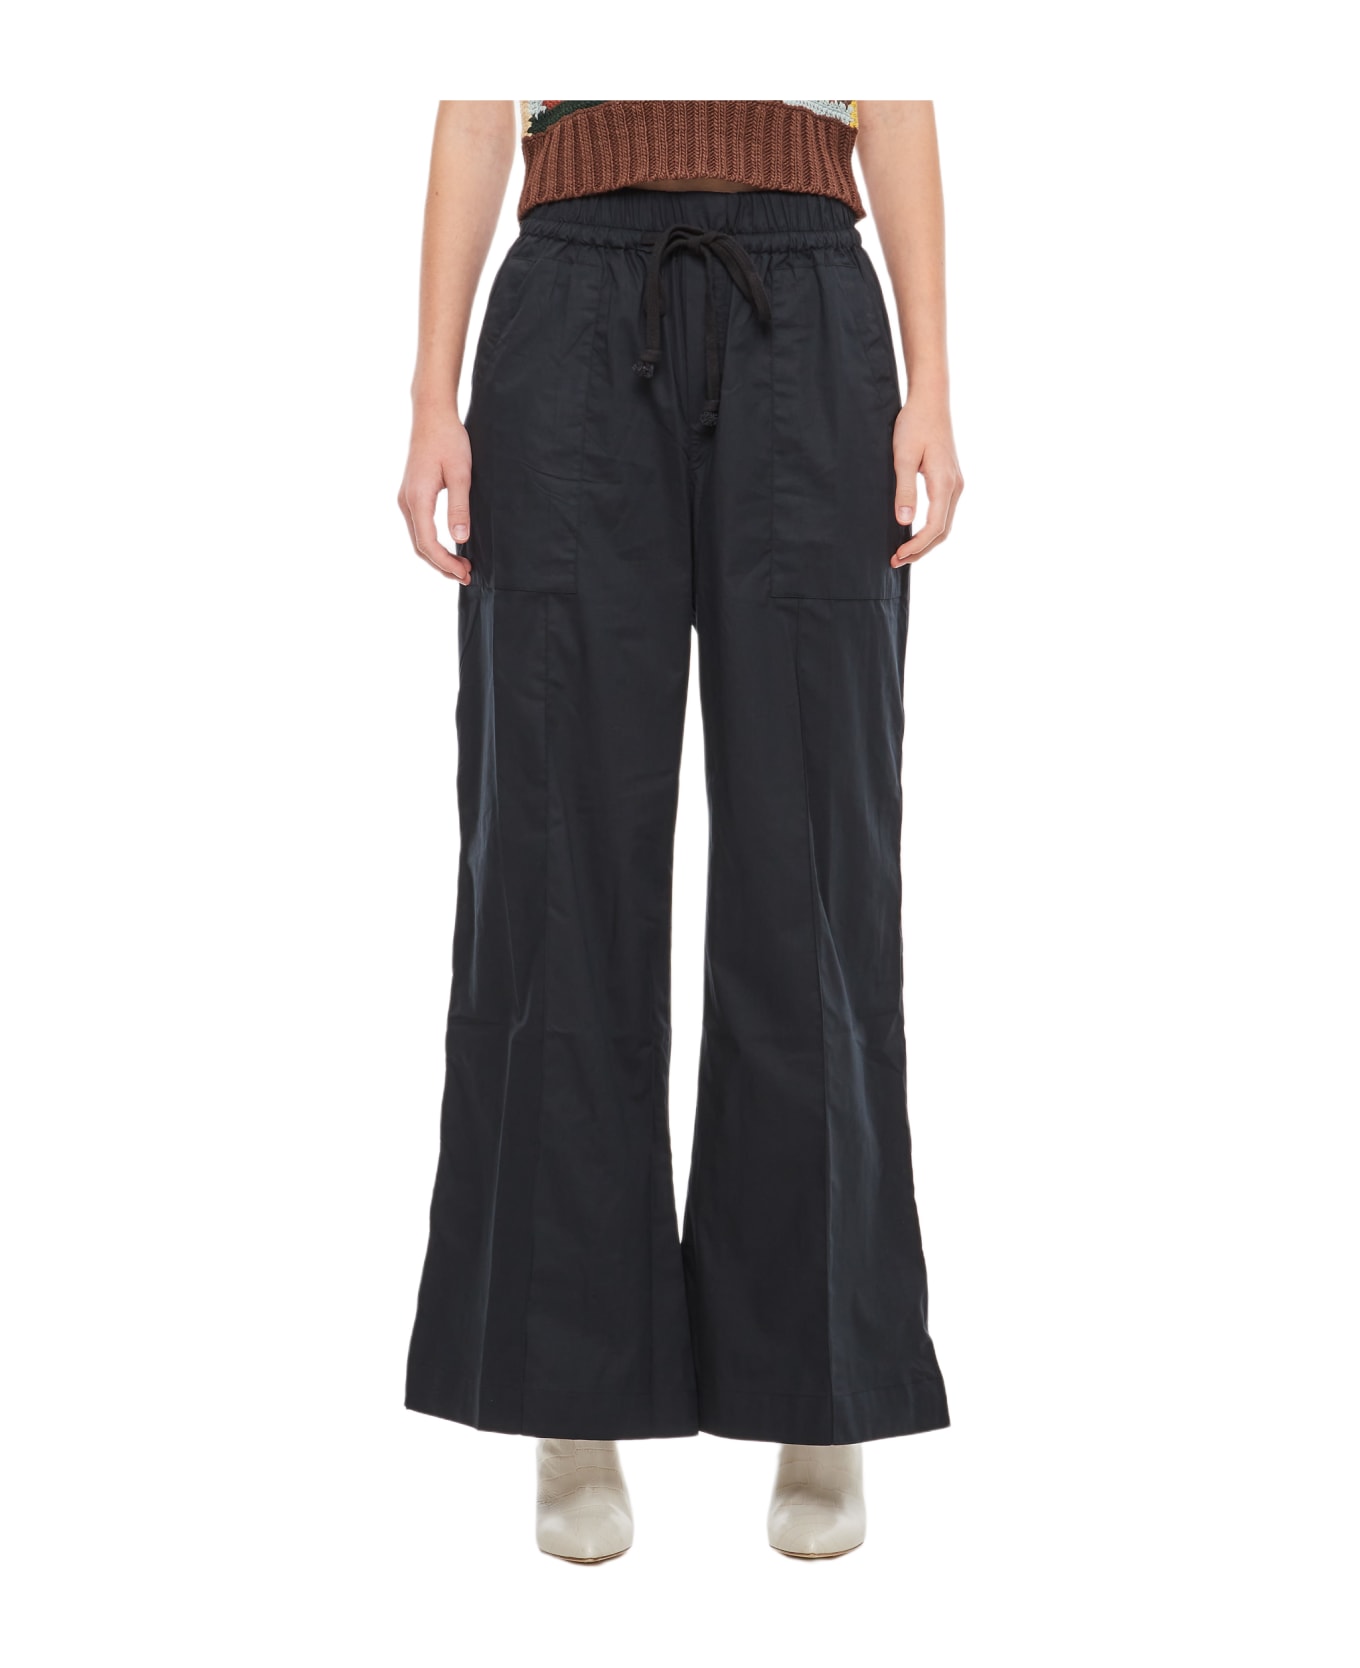 Sea New York Sia Solid Side Cut-out Pants - Black